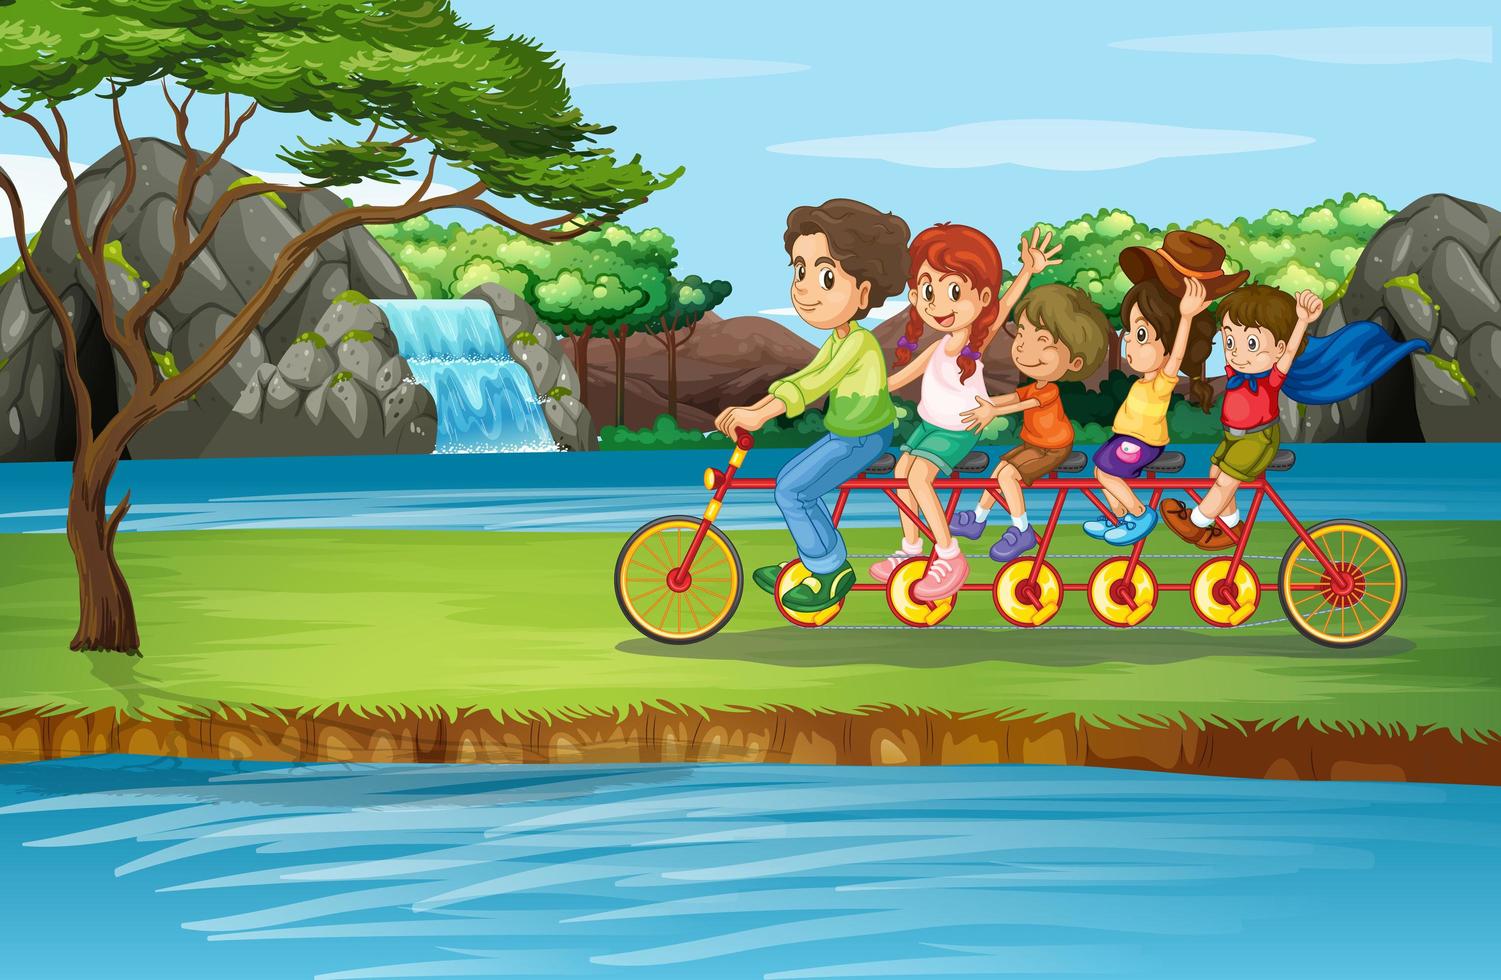 Scene with family riding bicycle in the park vector